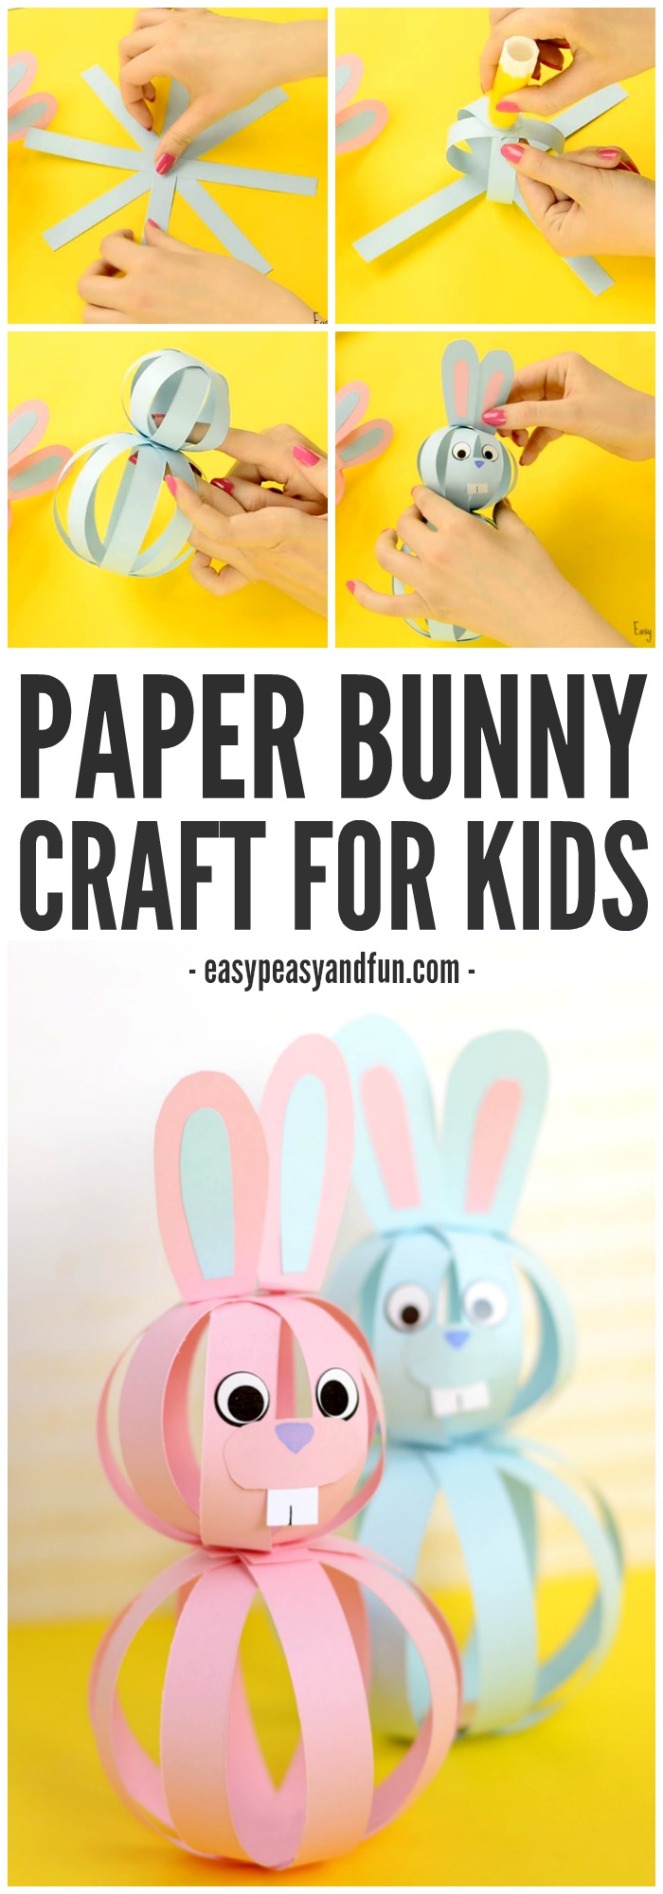 Cute-and-Simple-Paper-Bunny-Craft-for-Kids-to-Make